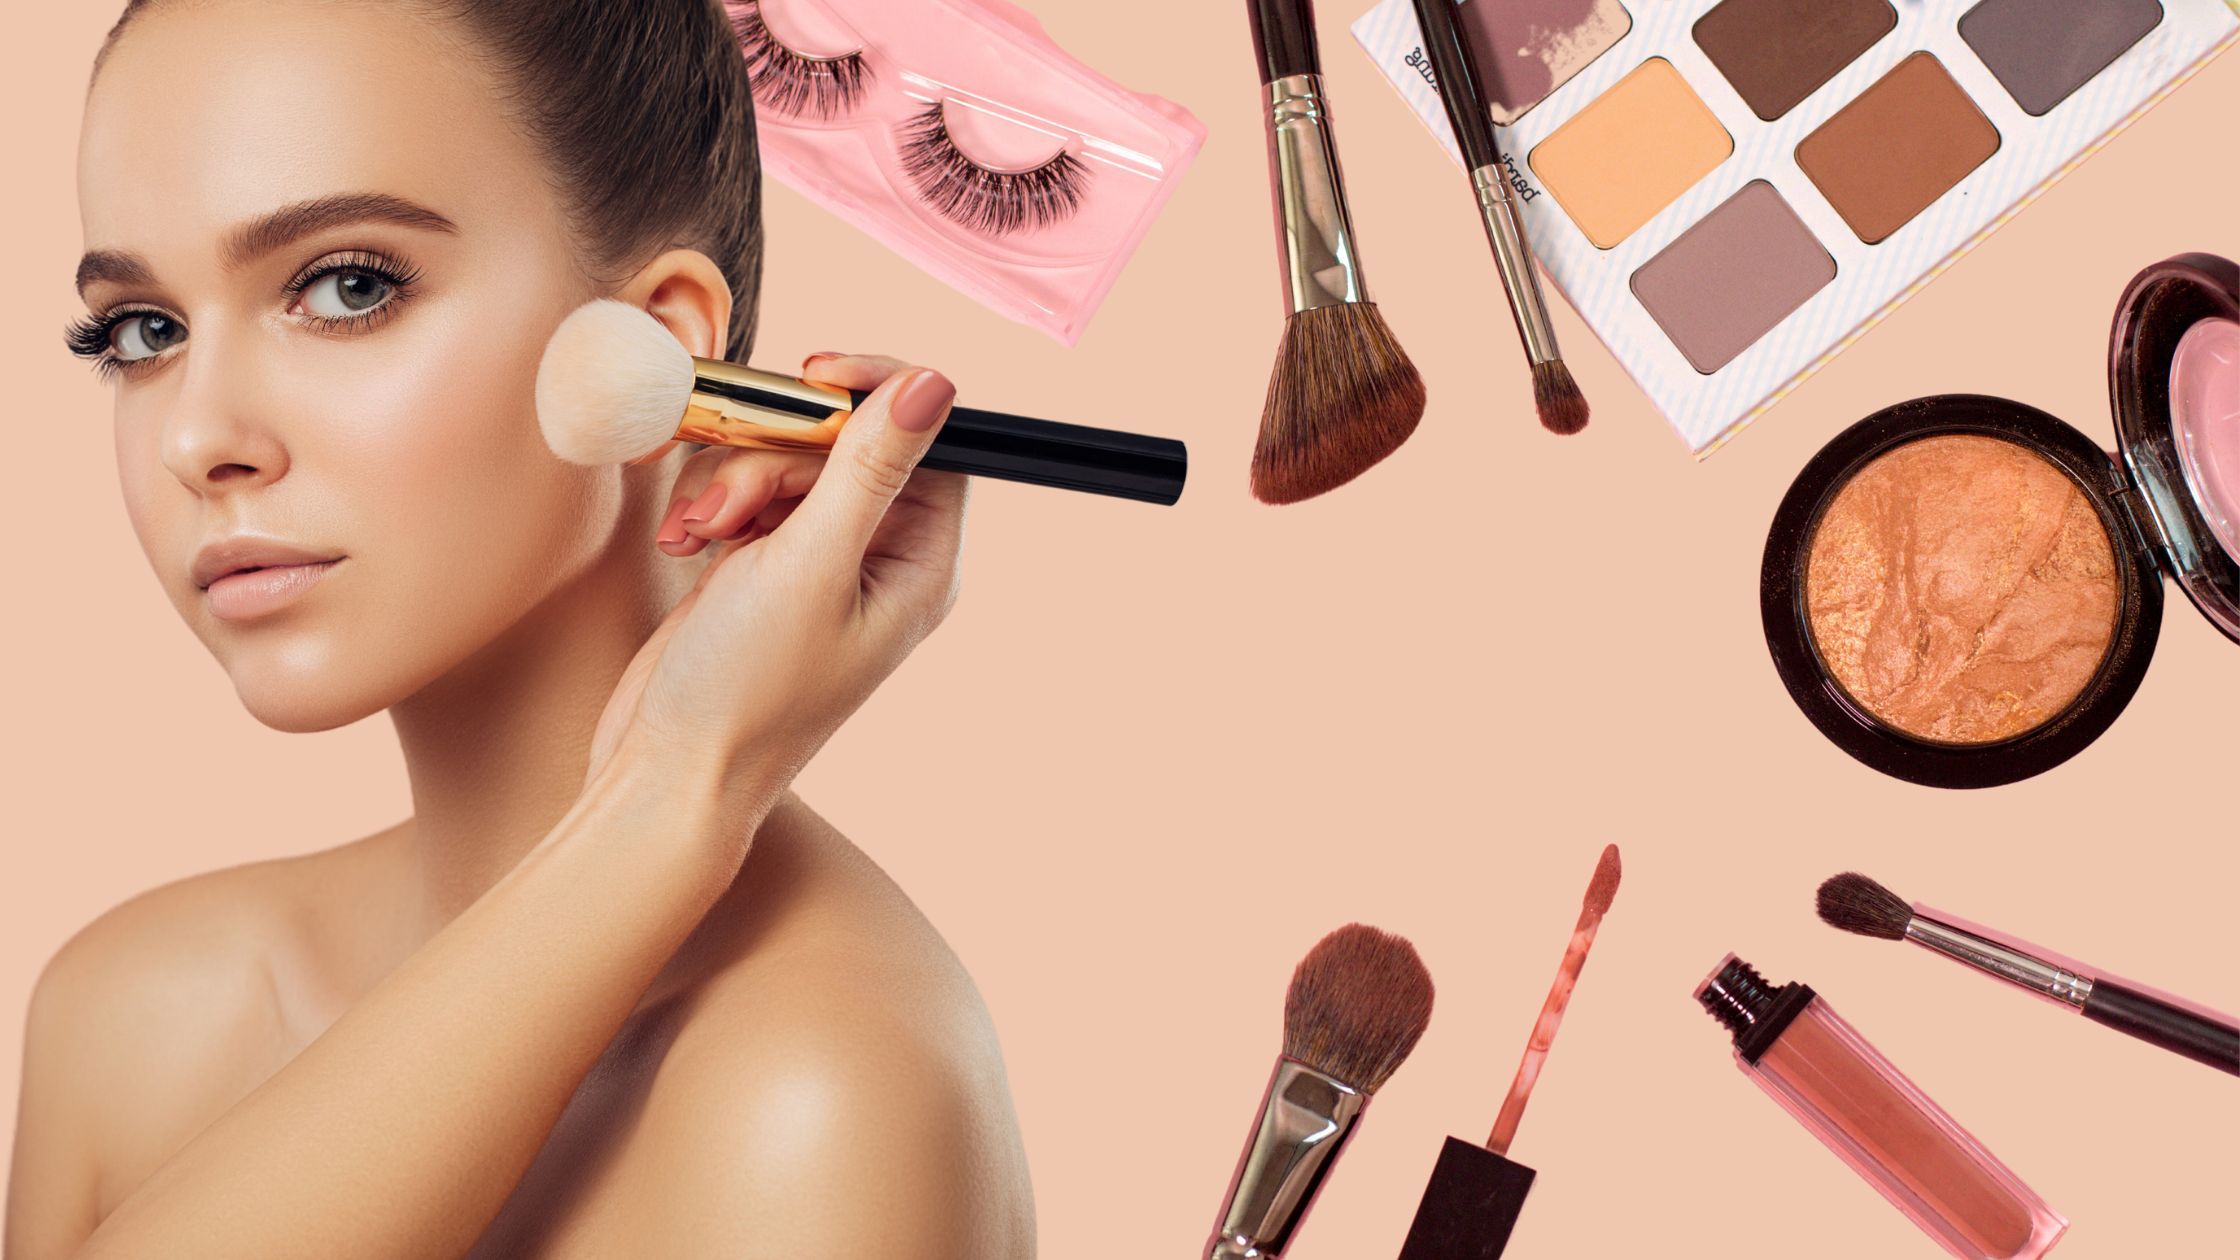 Top 5 B2B Marketplaces for Cosmetics You Must Explore